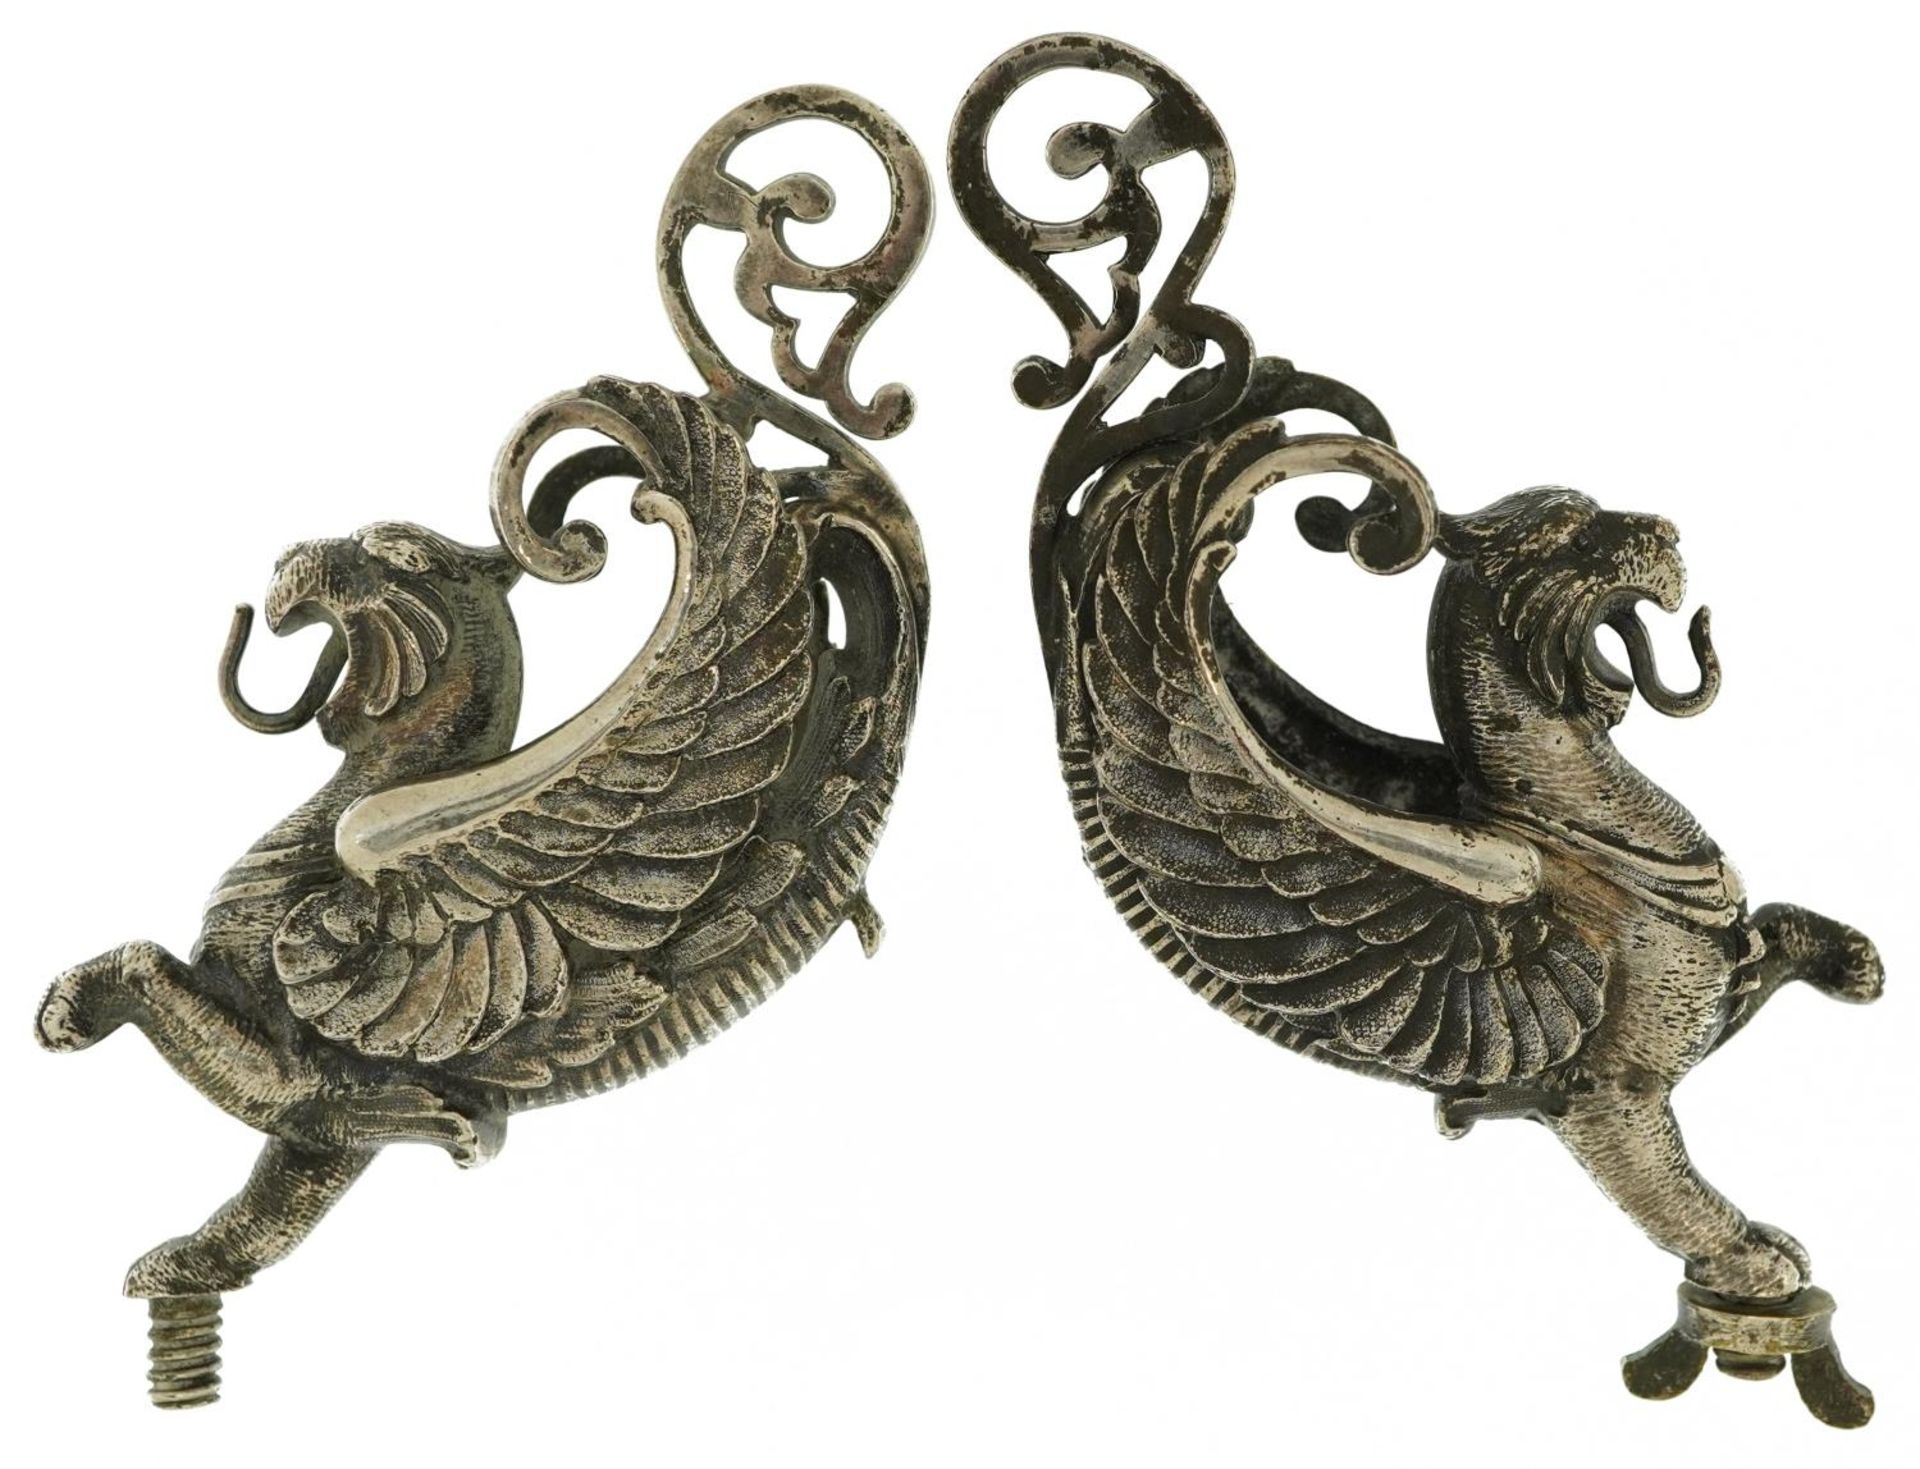 Pair of 19th century silver plated classical mounts in the form of griffins, each 12.5cm high - Image 2 of 3